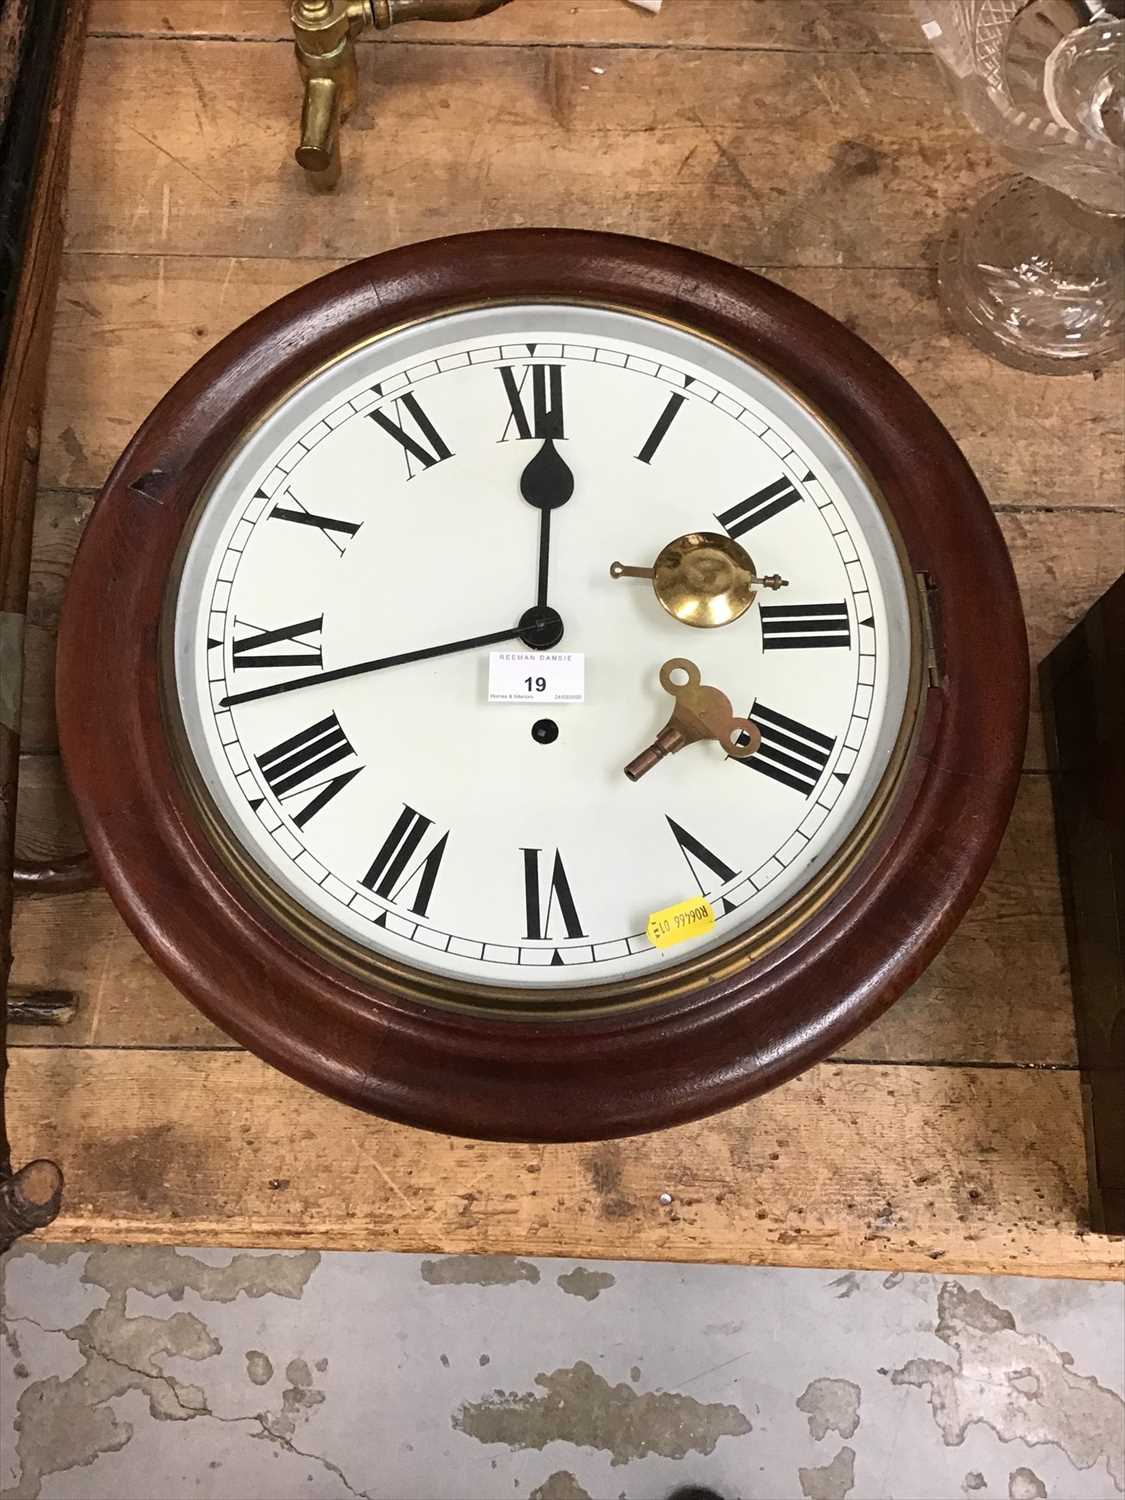 Lot 19 - Victorian-style wall clock with white dial and Roman numerals